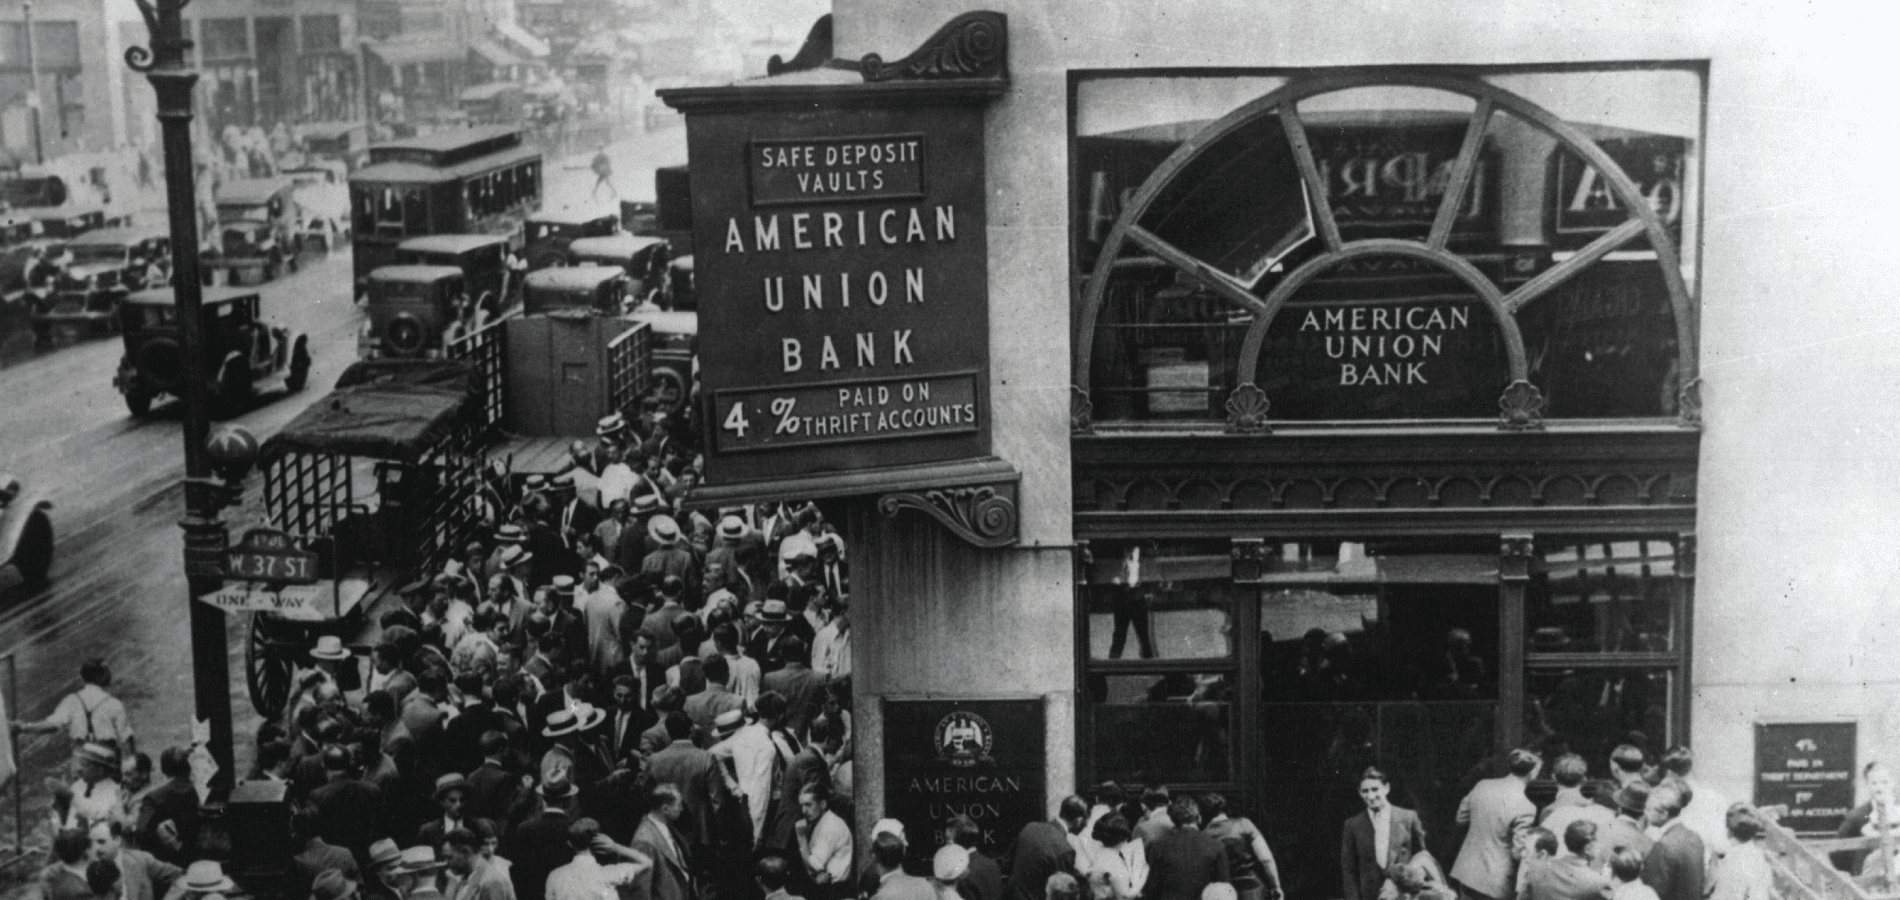 Crowd at New York's American Union Bank during Great Depression